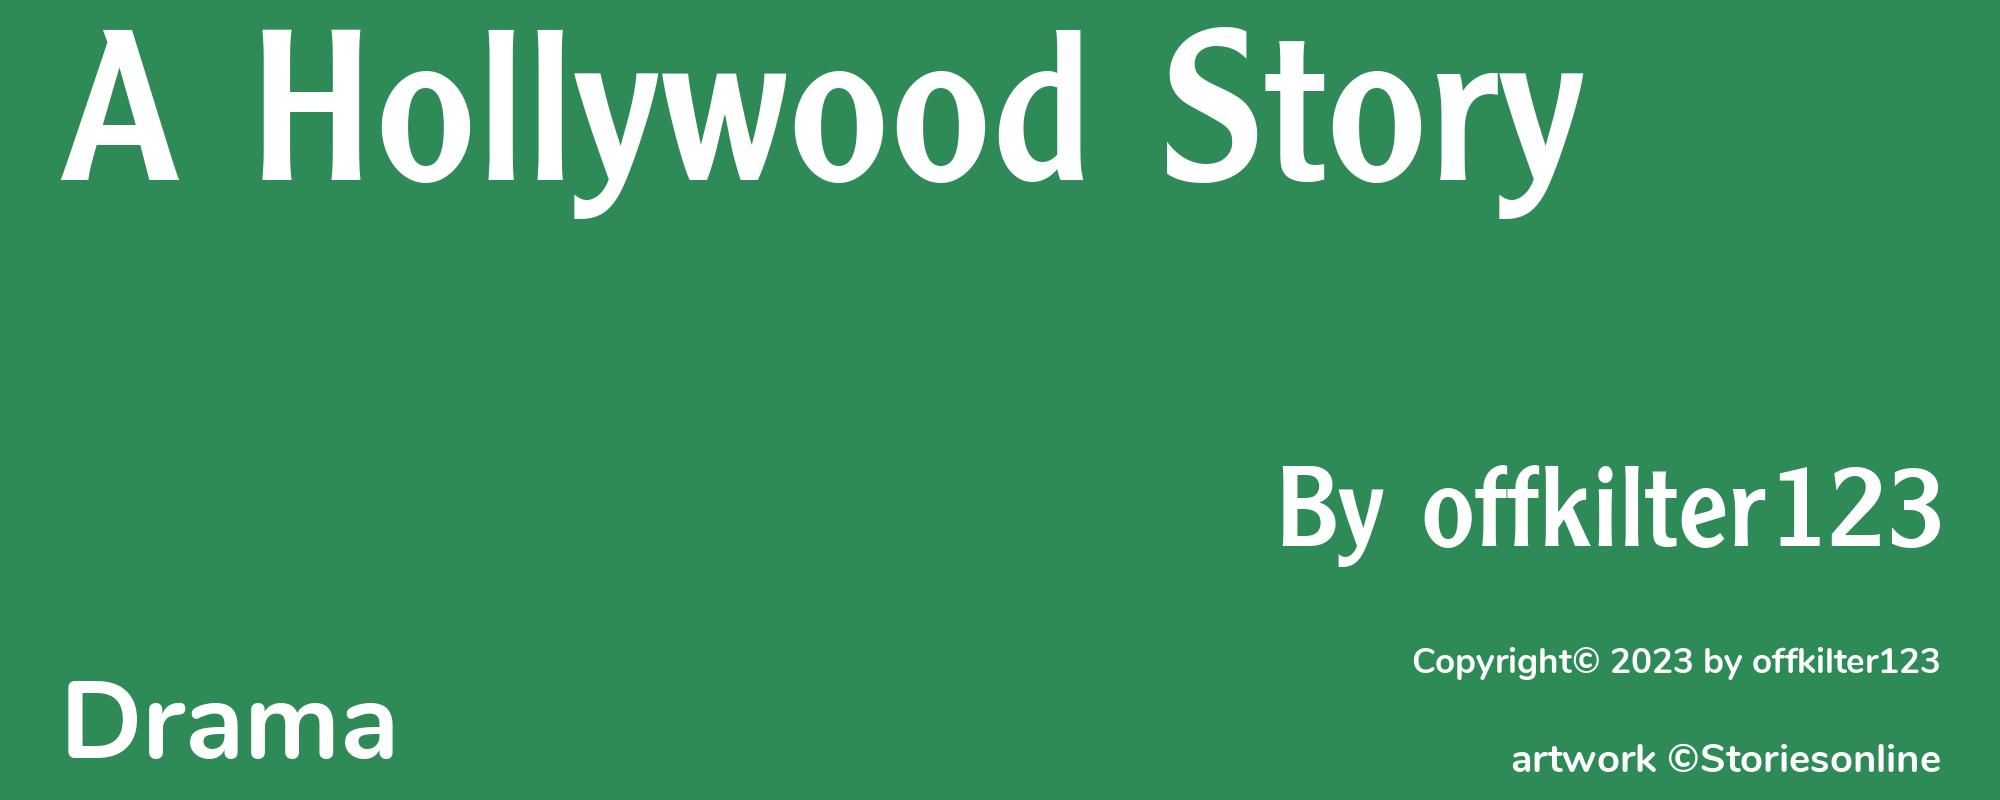 A Hollywood Story - Cover